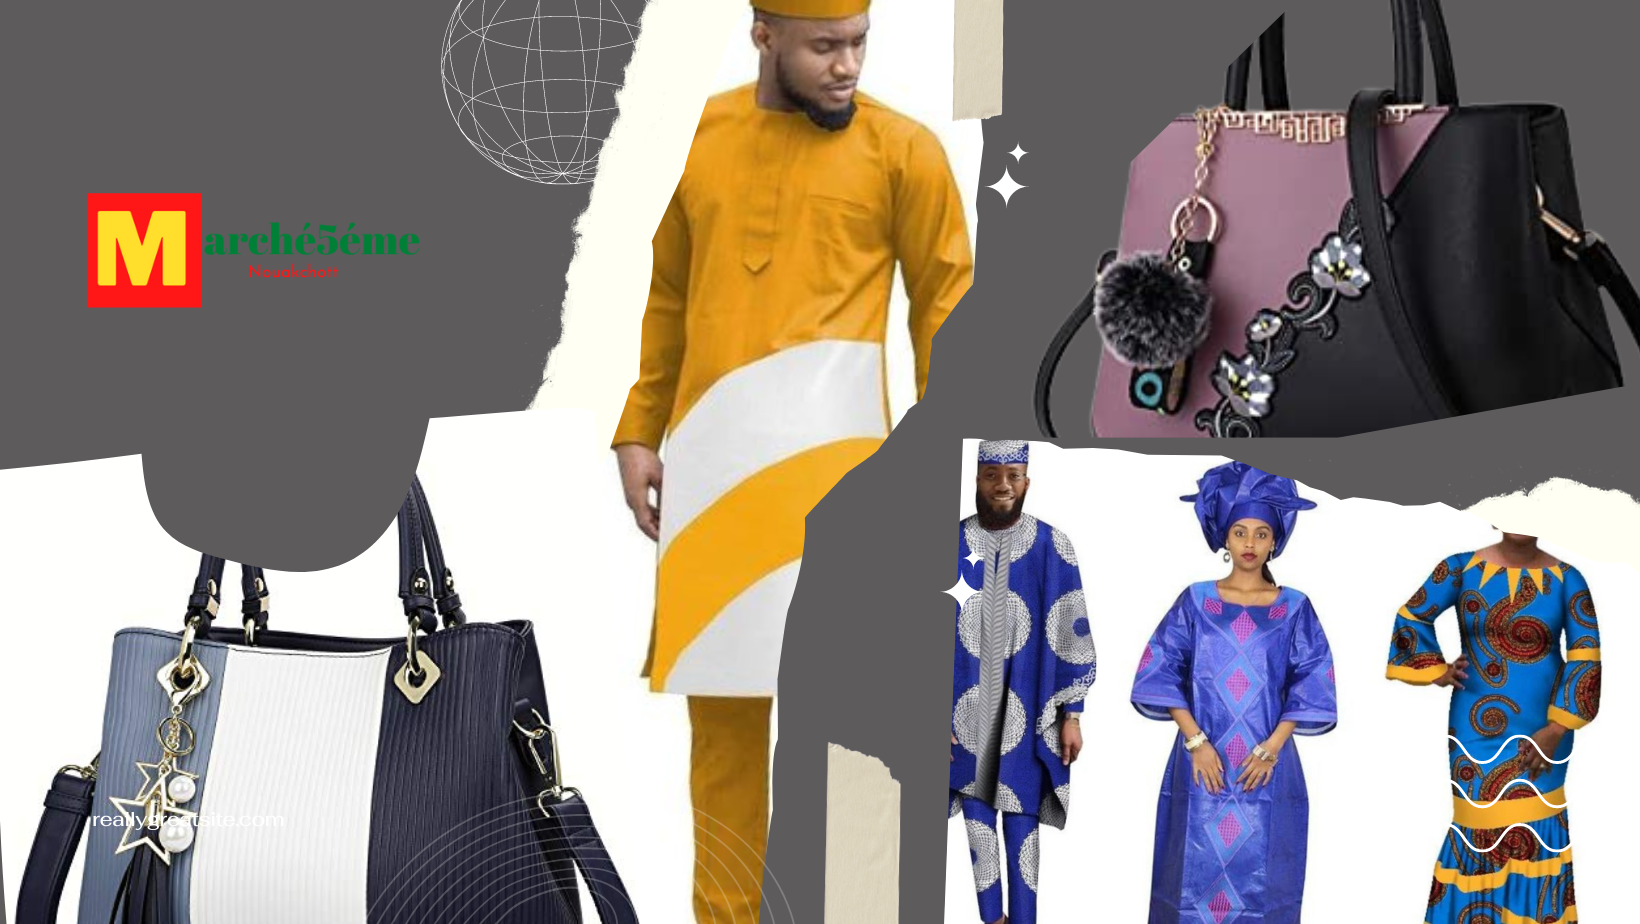 Grey Aesthetic Modern New Collection Fashion Collage Facebook Cover (1)